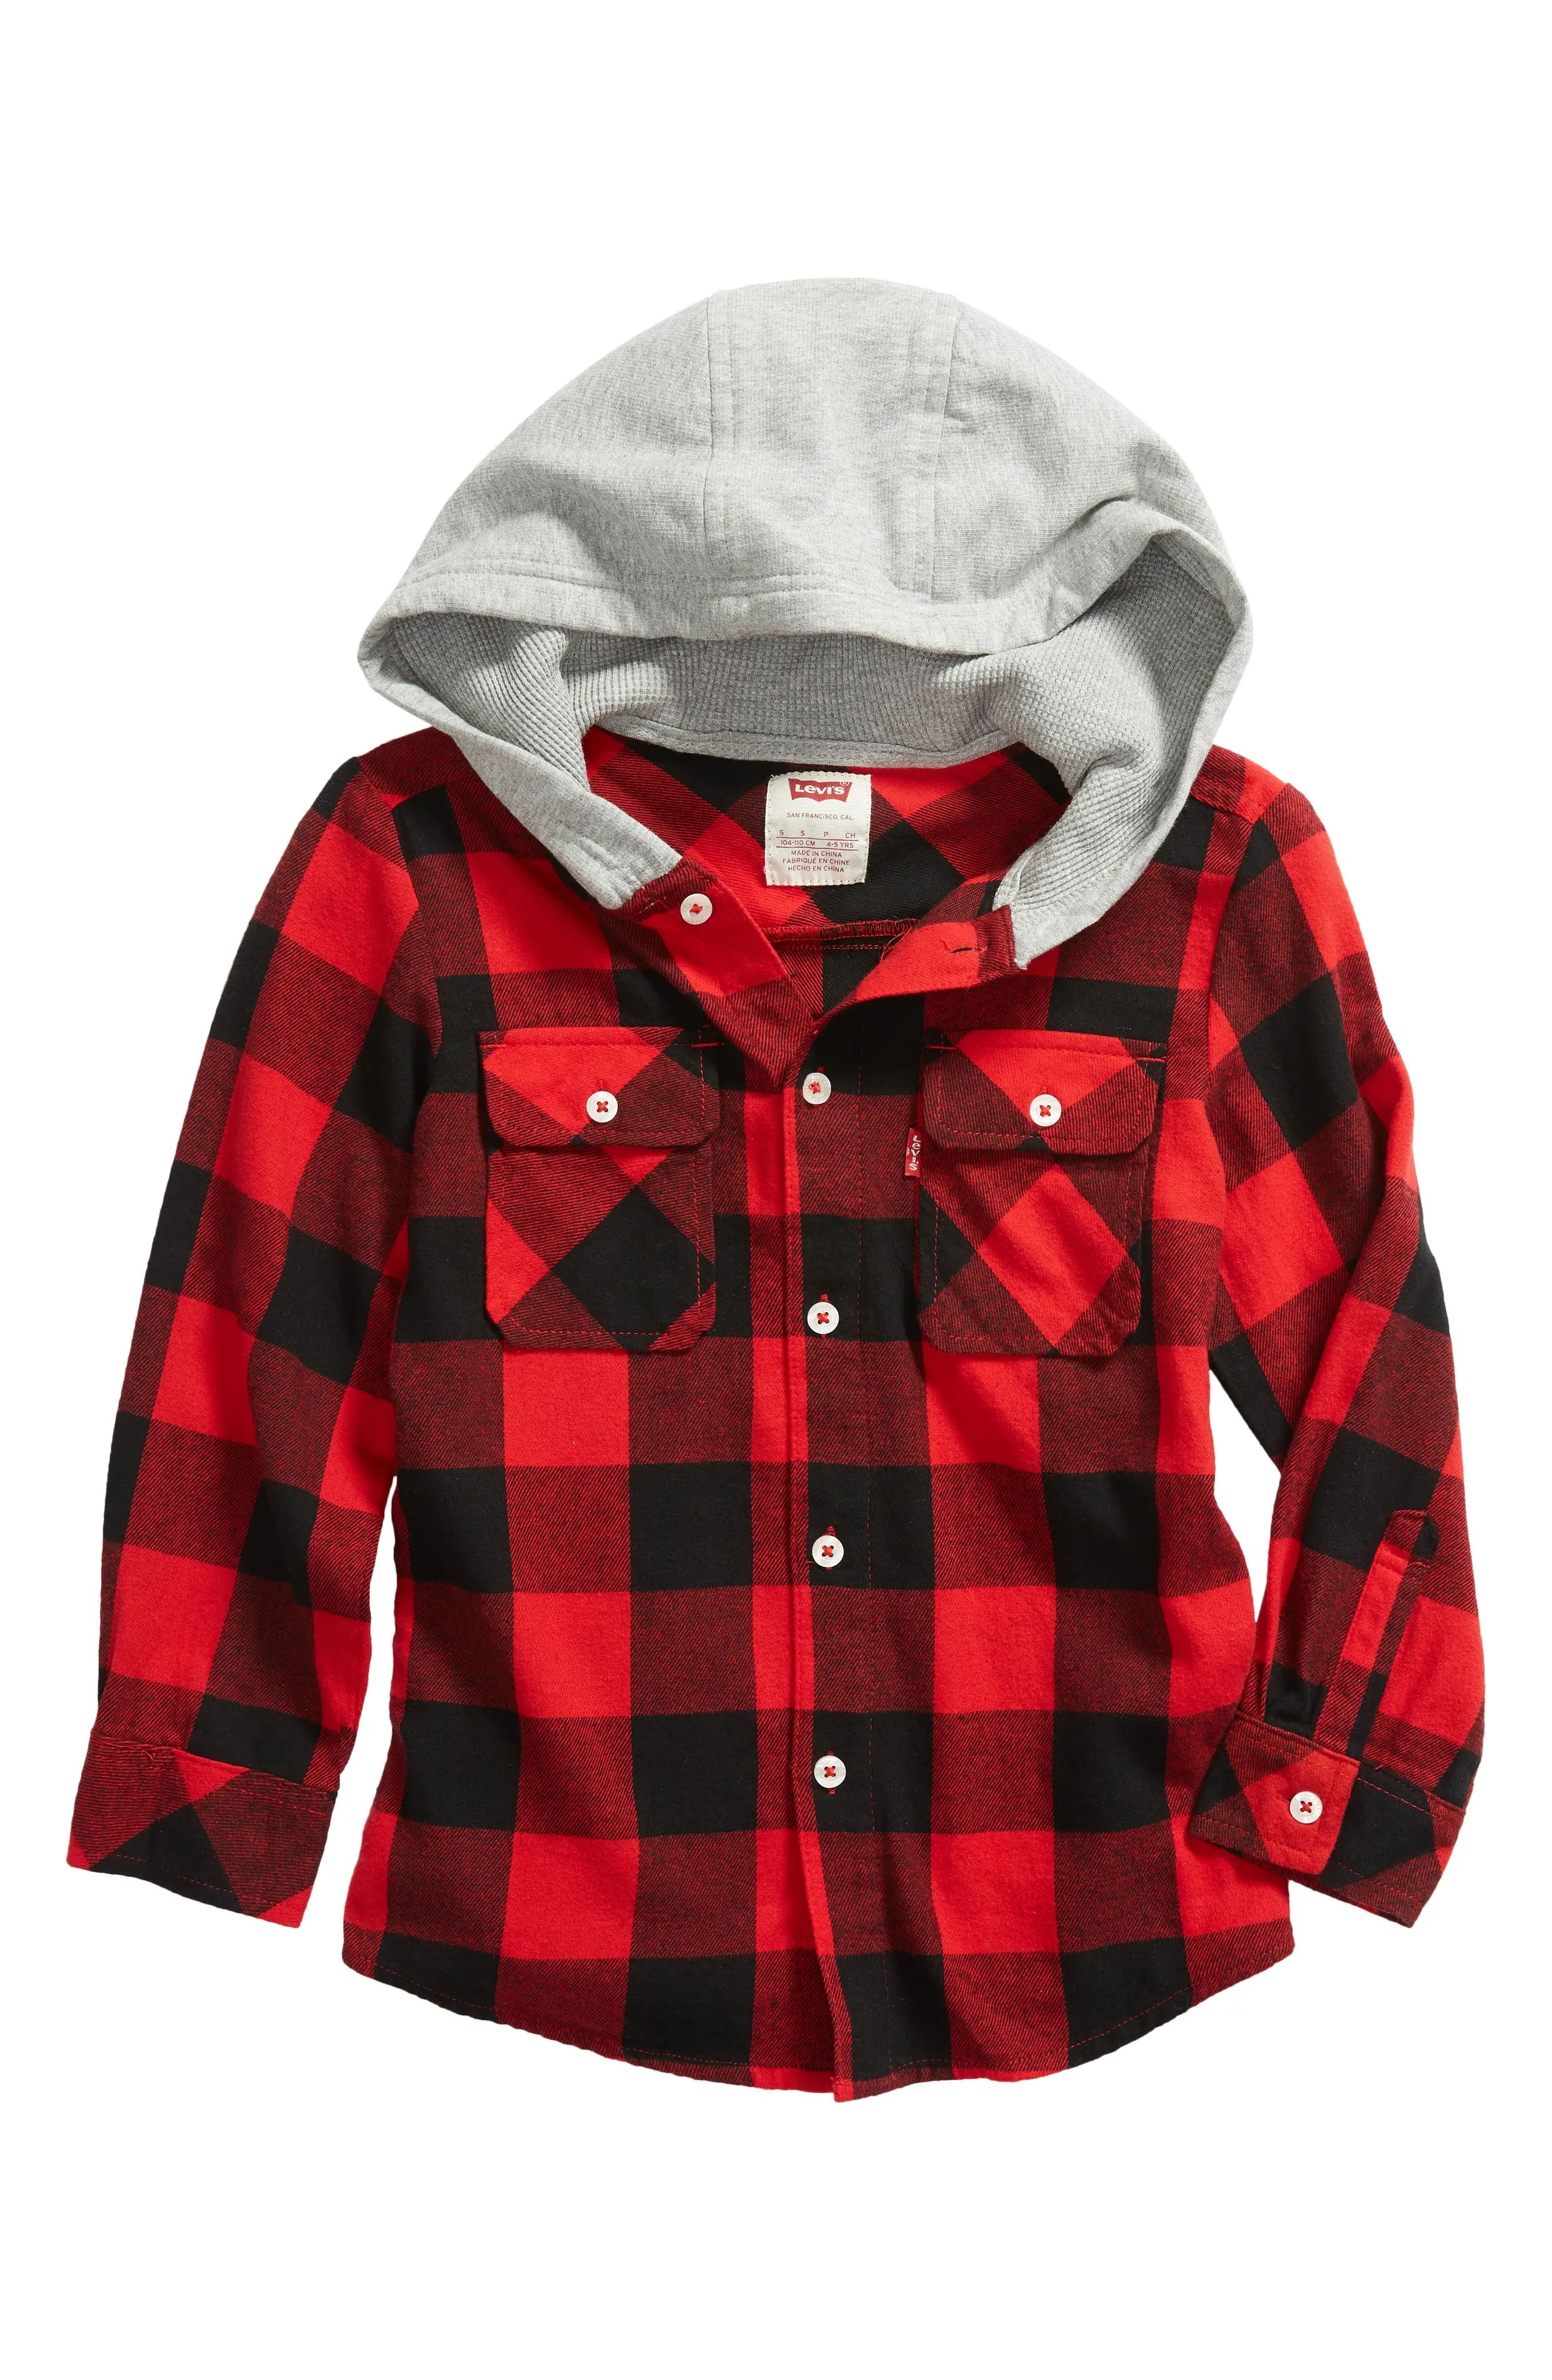 Toddler Boy's Levi'S Kids' Hooded Buffalo Check Shirt Jacket, Size 4 - Red | Nordstrom